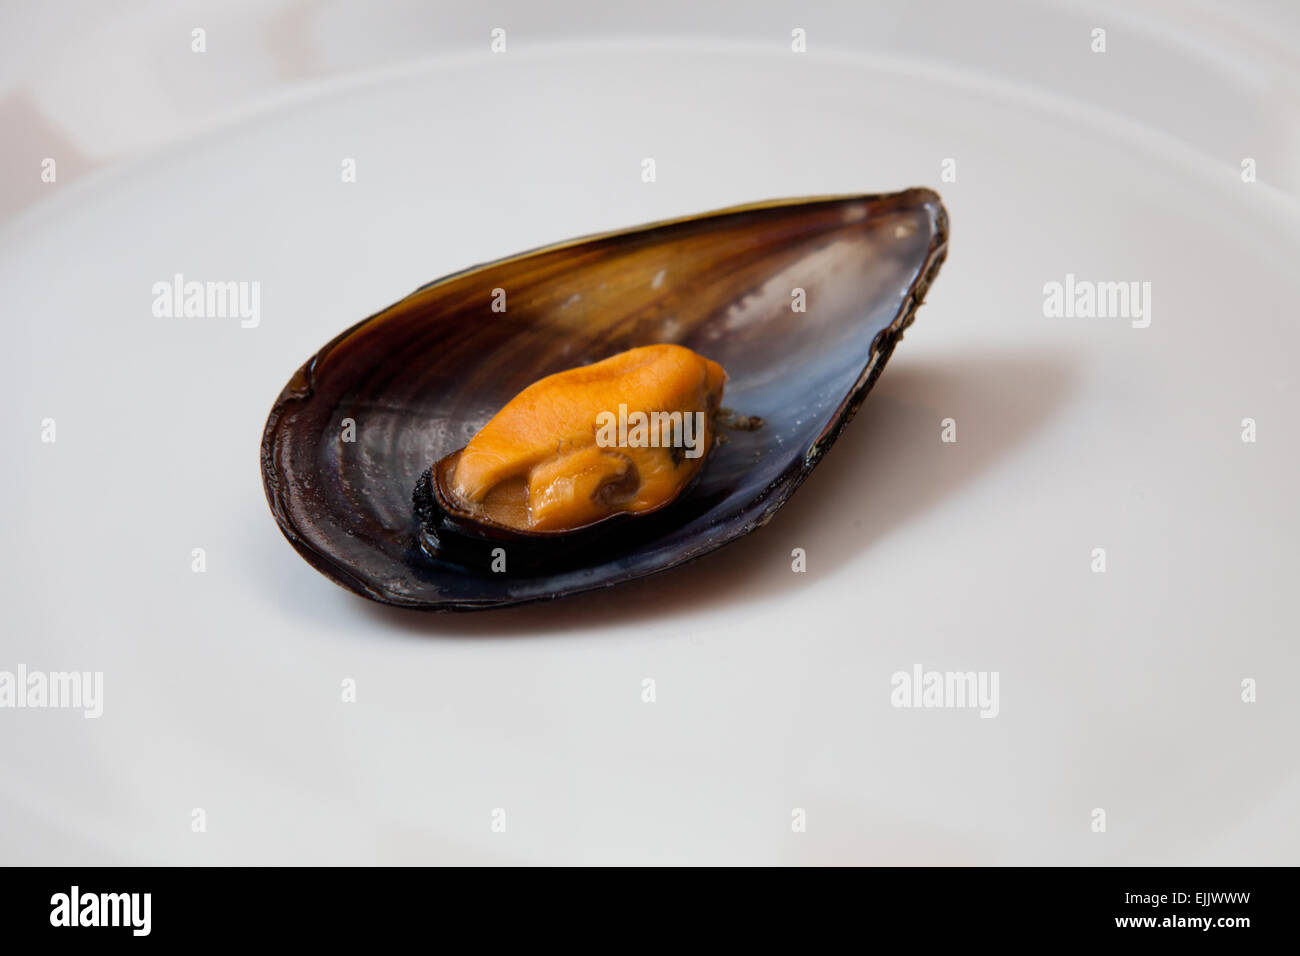 Close detail view of mussel boiled on a plate. Isolated on a white background Stock Photo